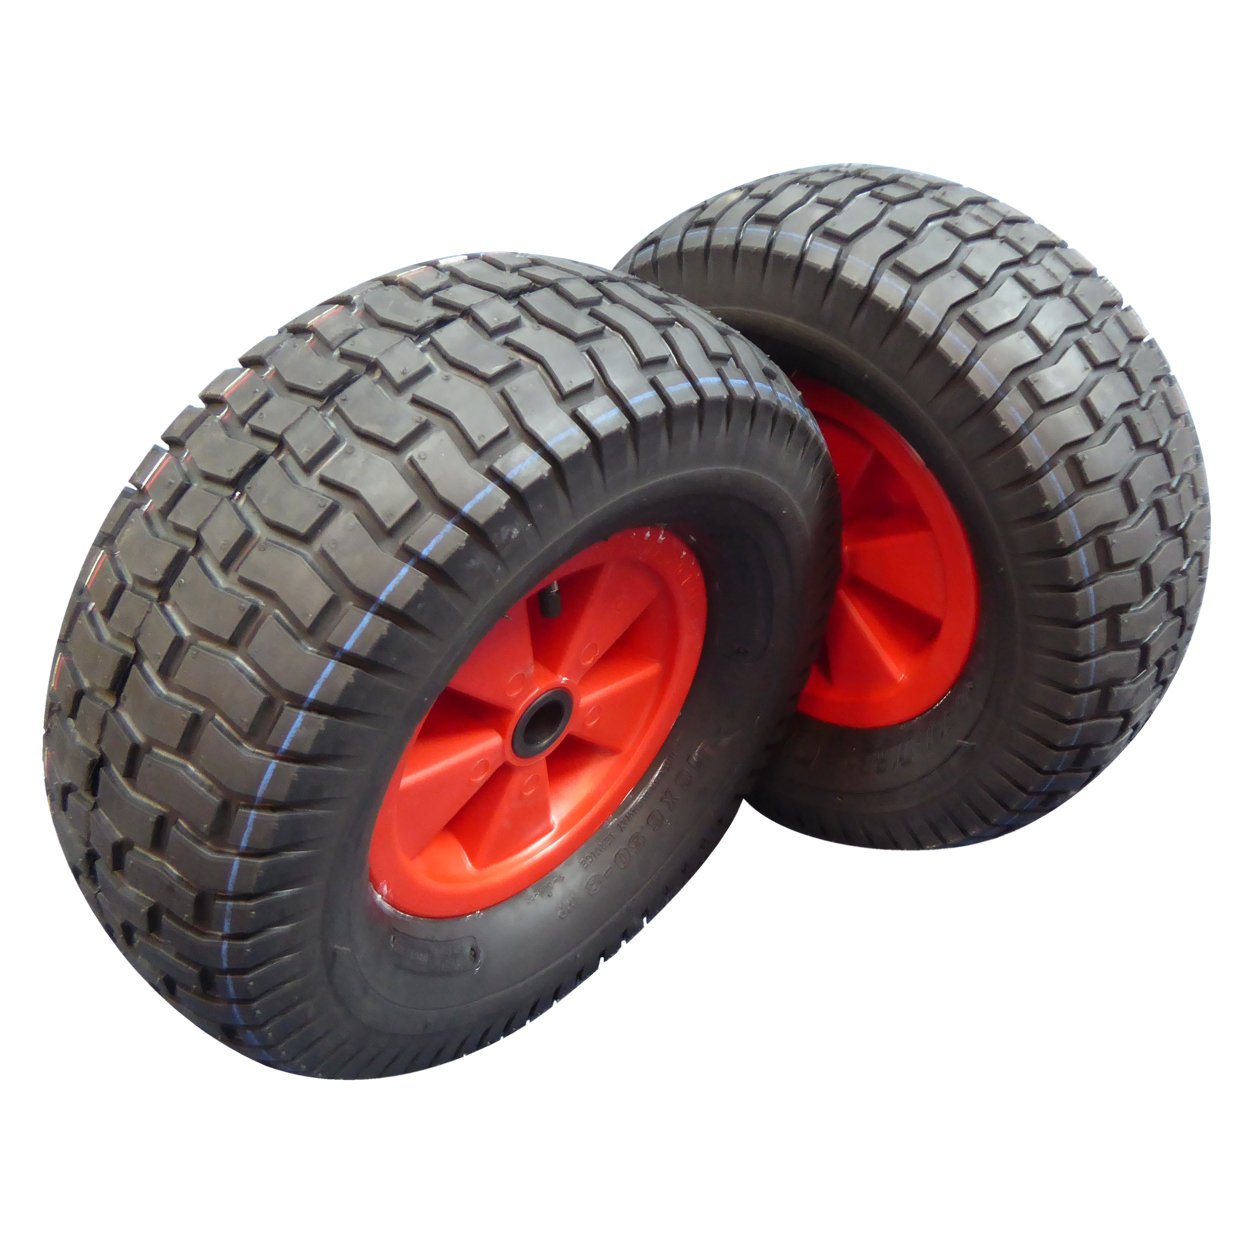 PAIR OF 146mm trolley /fishing trolley wheel with solid tractor tyre 